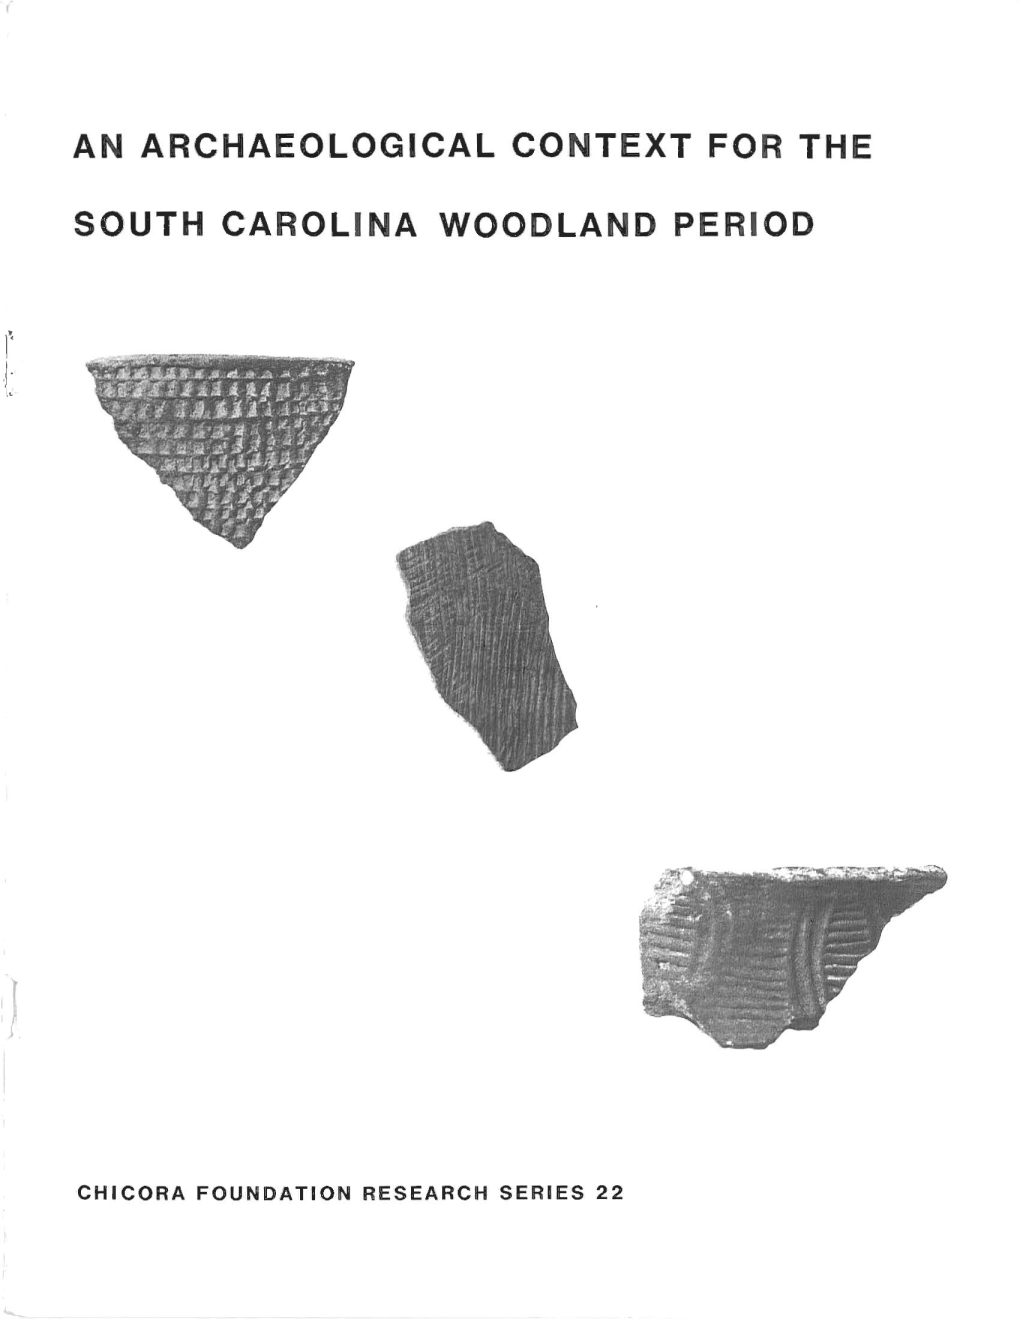 An Archaeological Context for the South Carolina Woodland Period